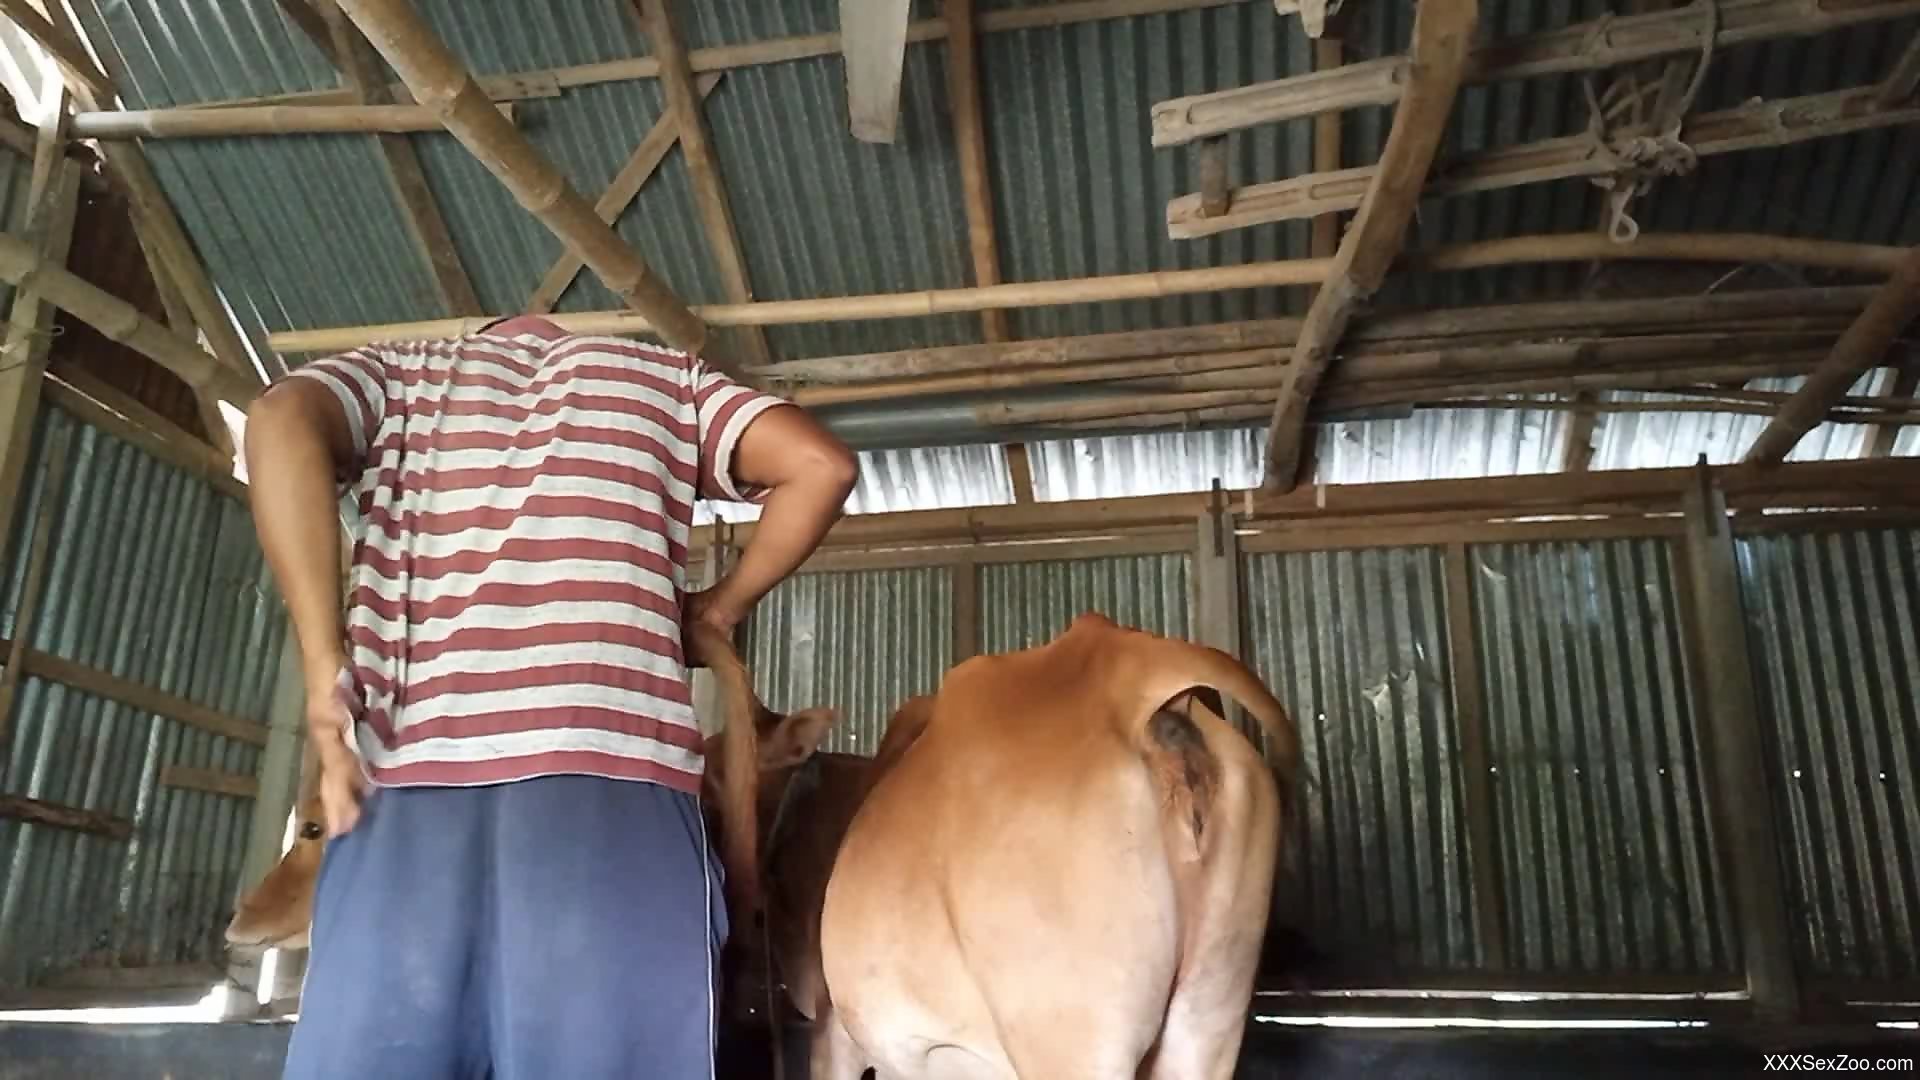 Xxx Woman And Cow Video - Horny farm guy craves cow's pussy for a few rounds - XXXSexZoo.com